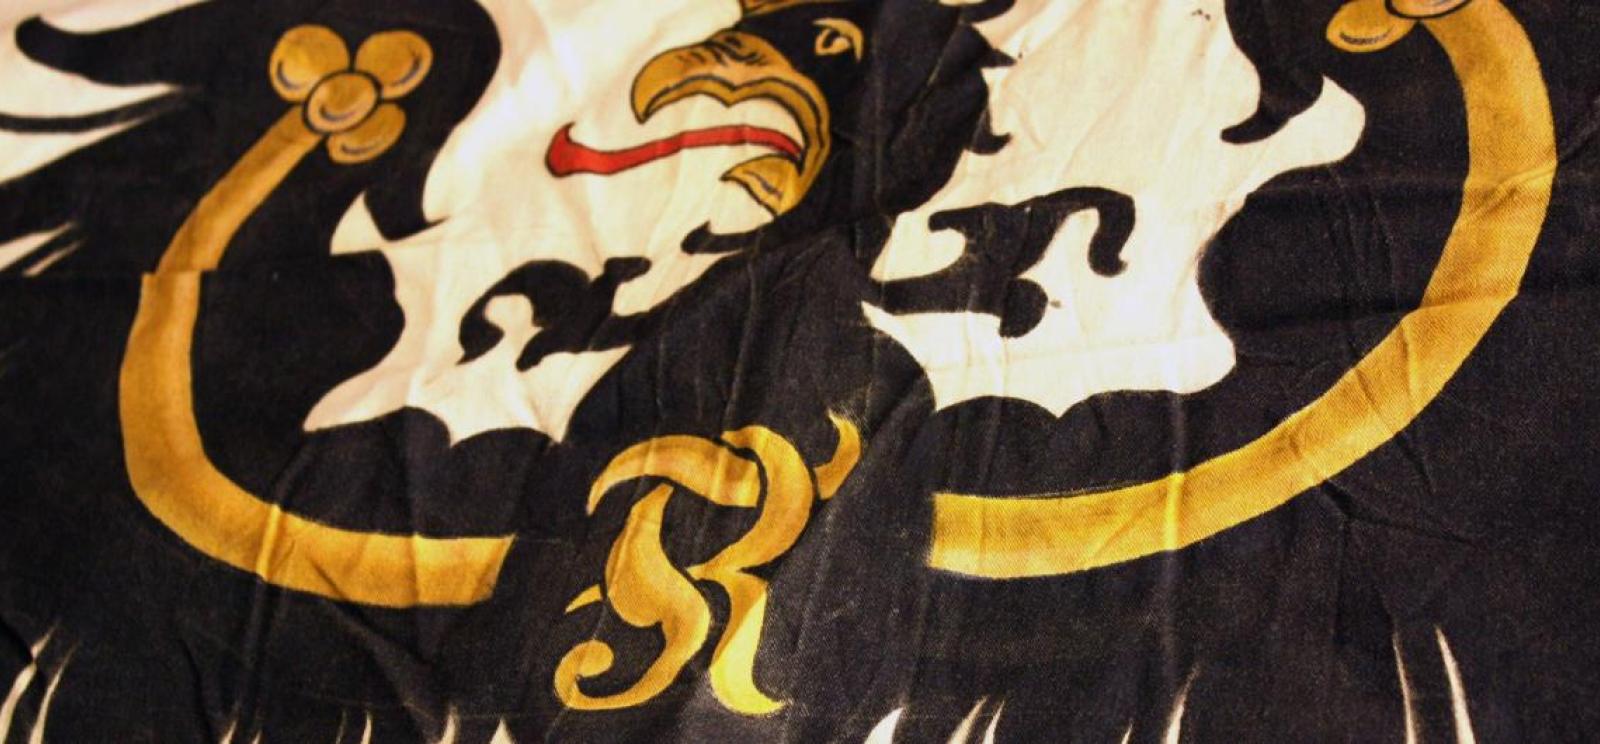 Photograph of an old Prussian flag: a stylized black and gold eagle on a cream field.